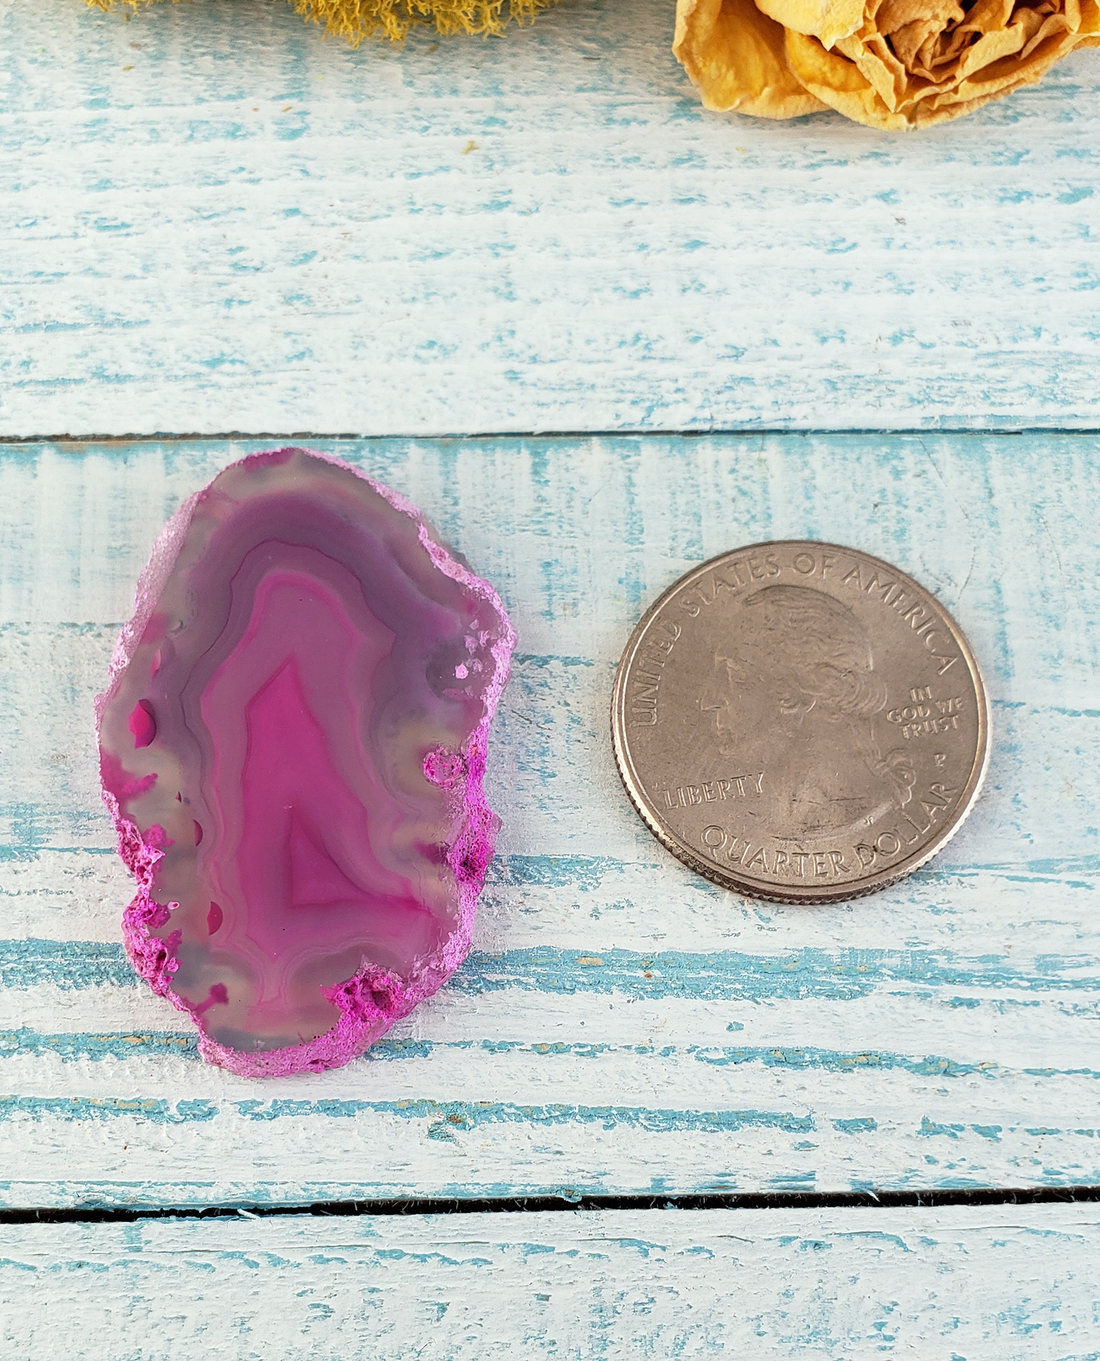 UNDRILLED Dyed Pink Agate Gemstone Slice - Small